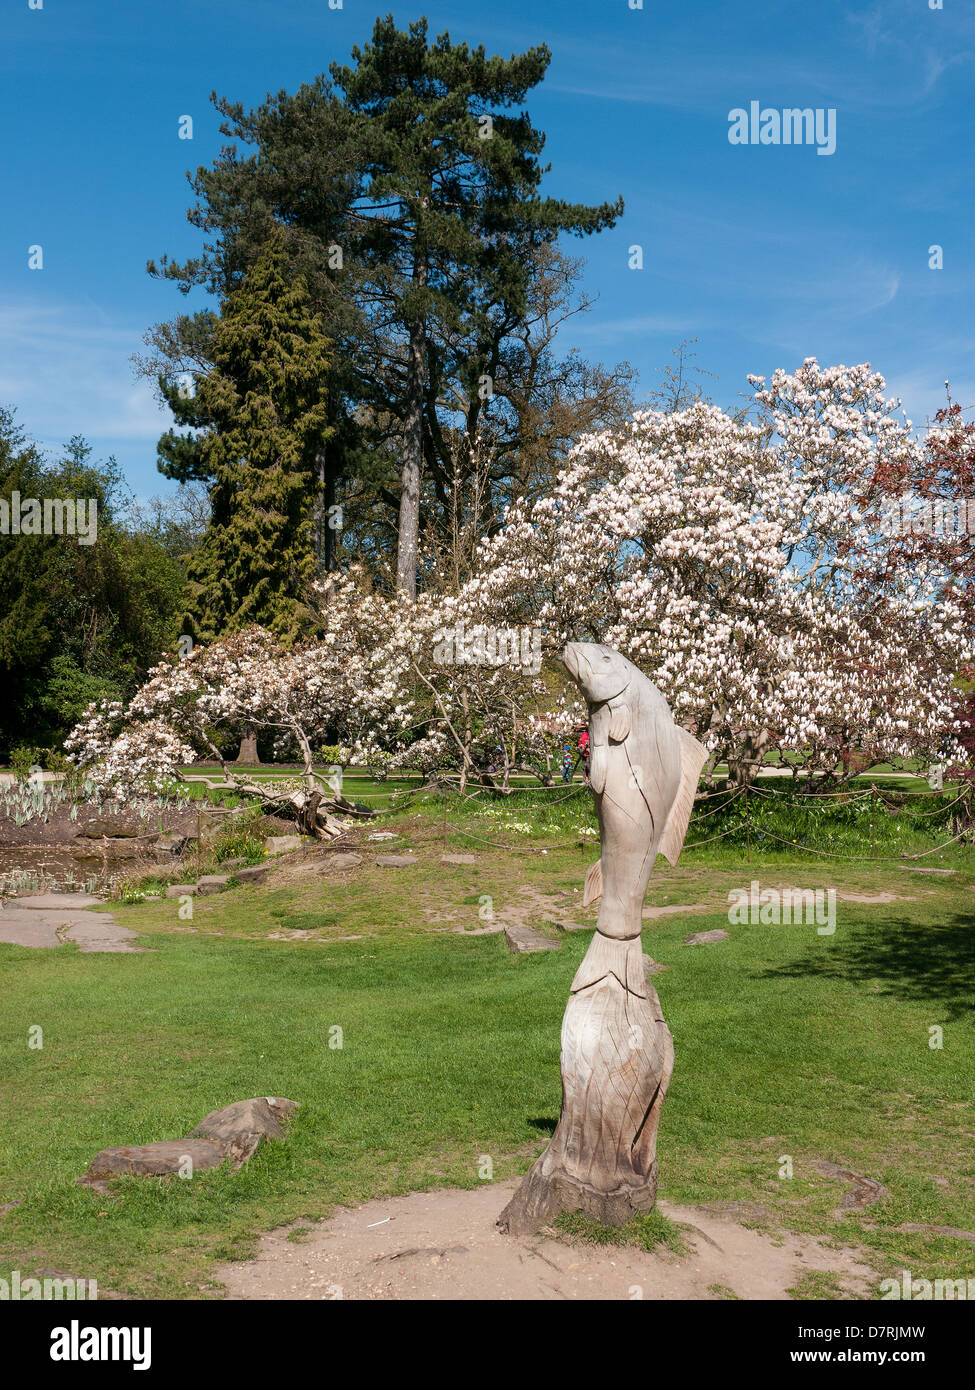 Sculpture in the grounds of Cliveden House, a National Trust Property, Bucks, UK Stock Photo